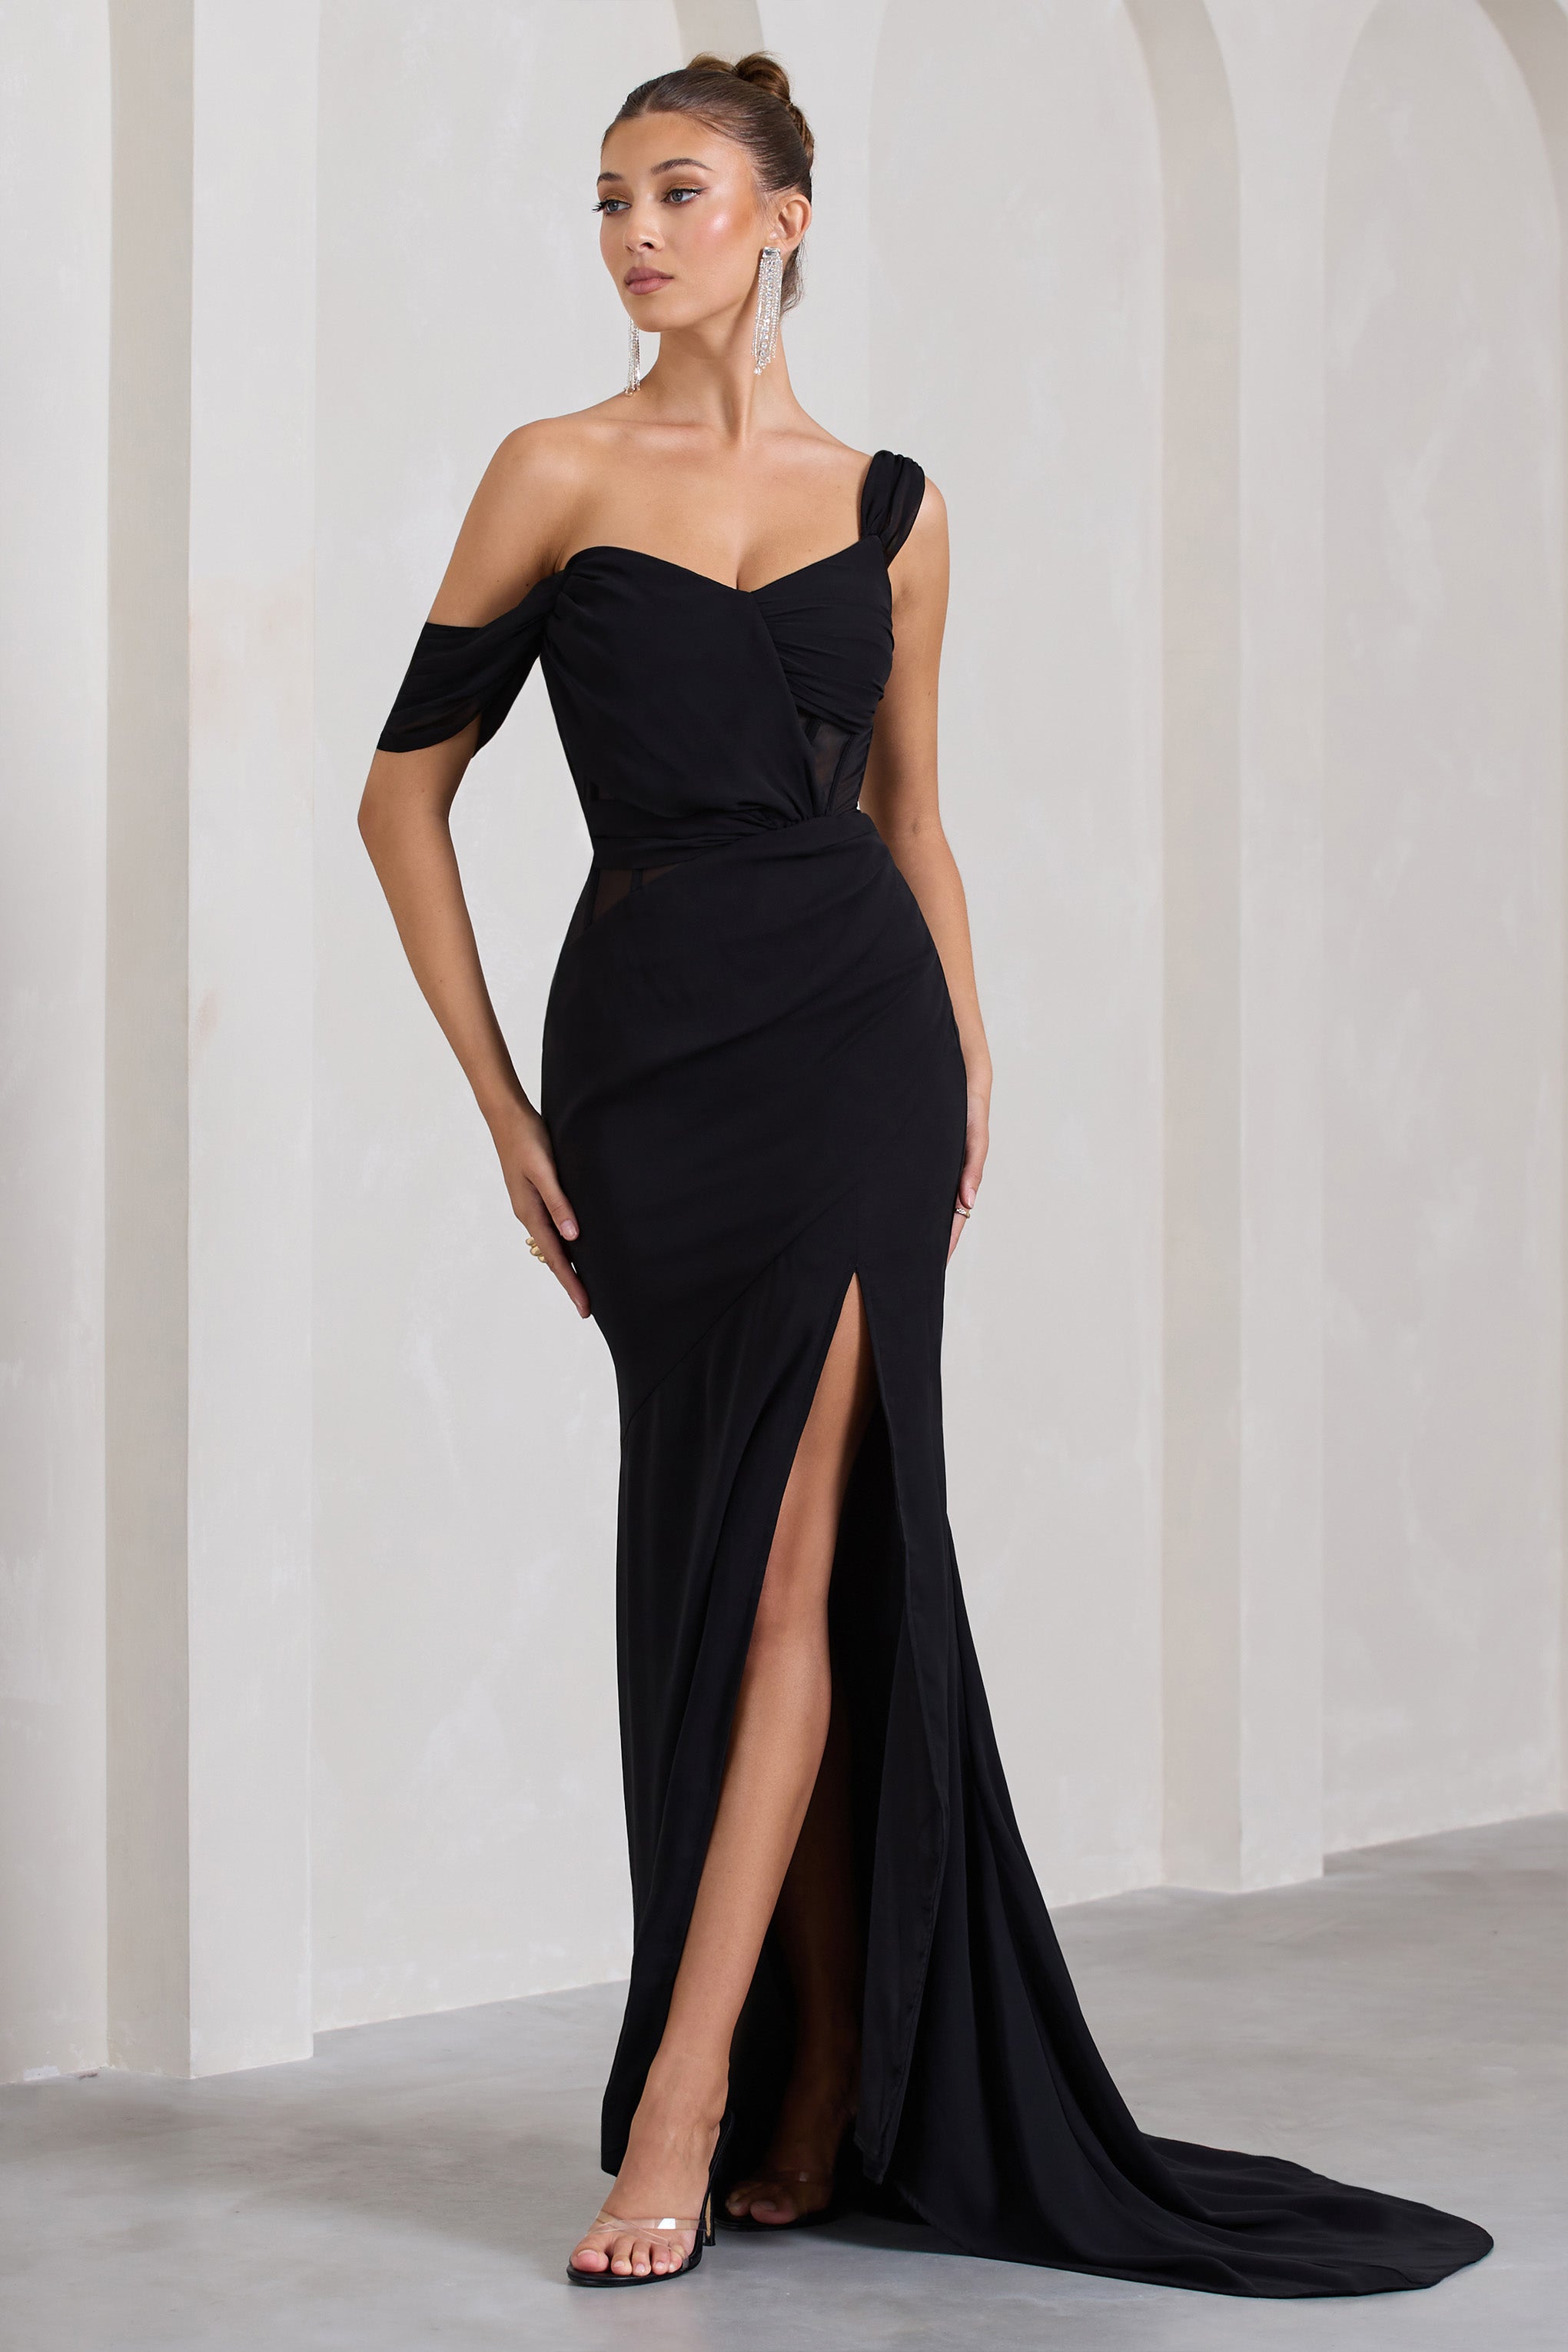 Fatal Attraction Black Chiffon Fishtail Maxi Dress With Draped Sleeves